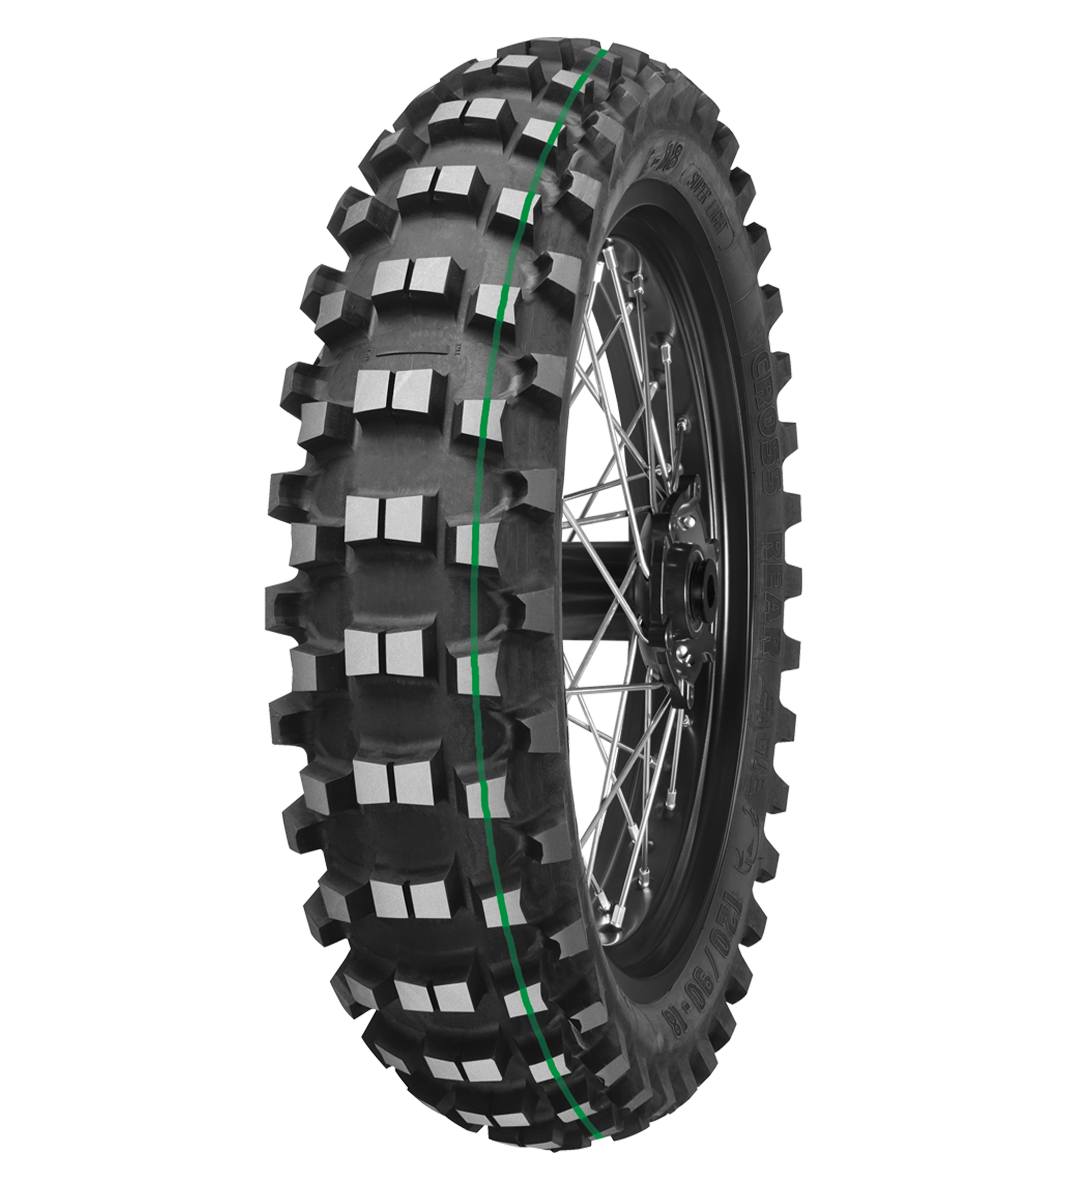 Mitas C-18 EAGLE 110/100-18 Enduro Competition Off-Road SUPER LIGHT 64R Green Tube Rear Tire, 226330, 110/100-18, C-18 Eagle, Enduro, Enduro Competition, Off-Road, Rear, Tires - Imported and distributed in North & South America by Lindeco Genuine Powersports - Premier Powersports Equipment and Accessories for Motorcycle Enthusiasts, Professional Riders and Dealers.